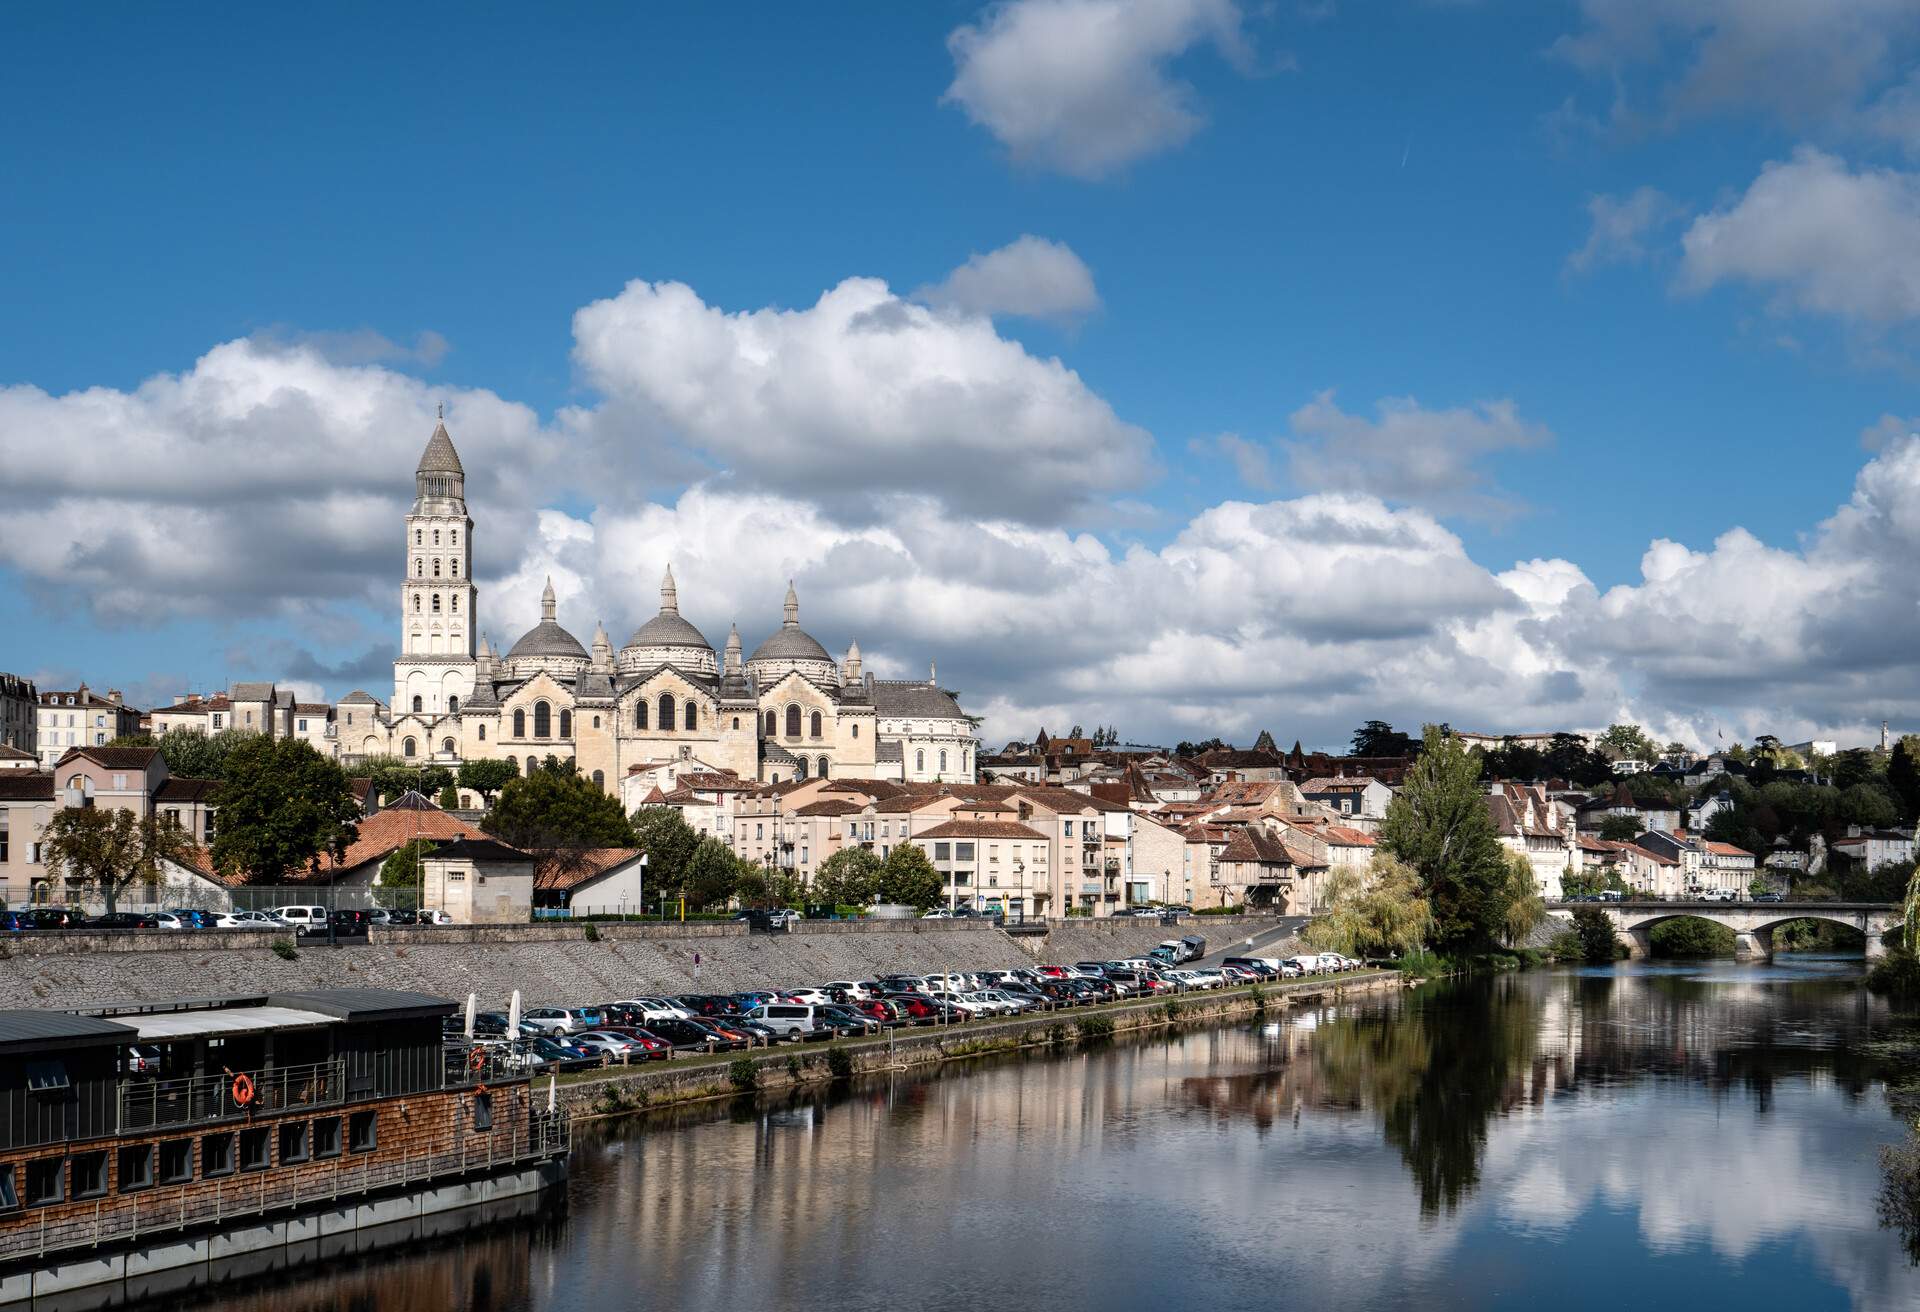 A view of the Romanesque Cathedral of Saint Front in Perigueux the capital of the historic Perigord and Prefecture of the Dordogne department. The historic cathedral has been designated a World Heritage site.